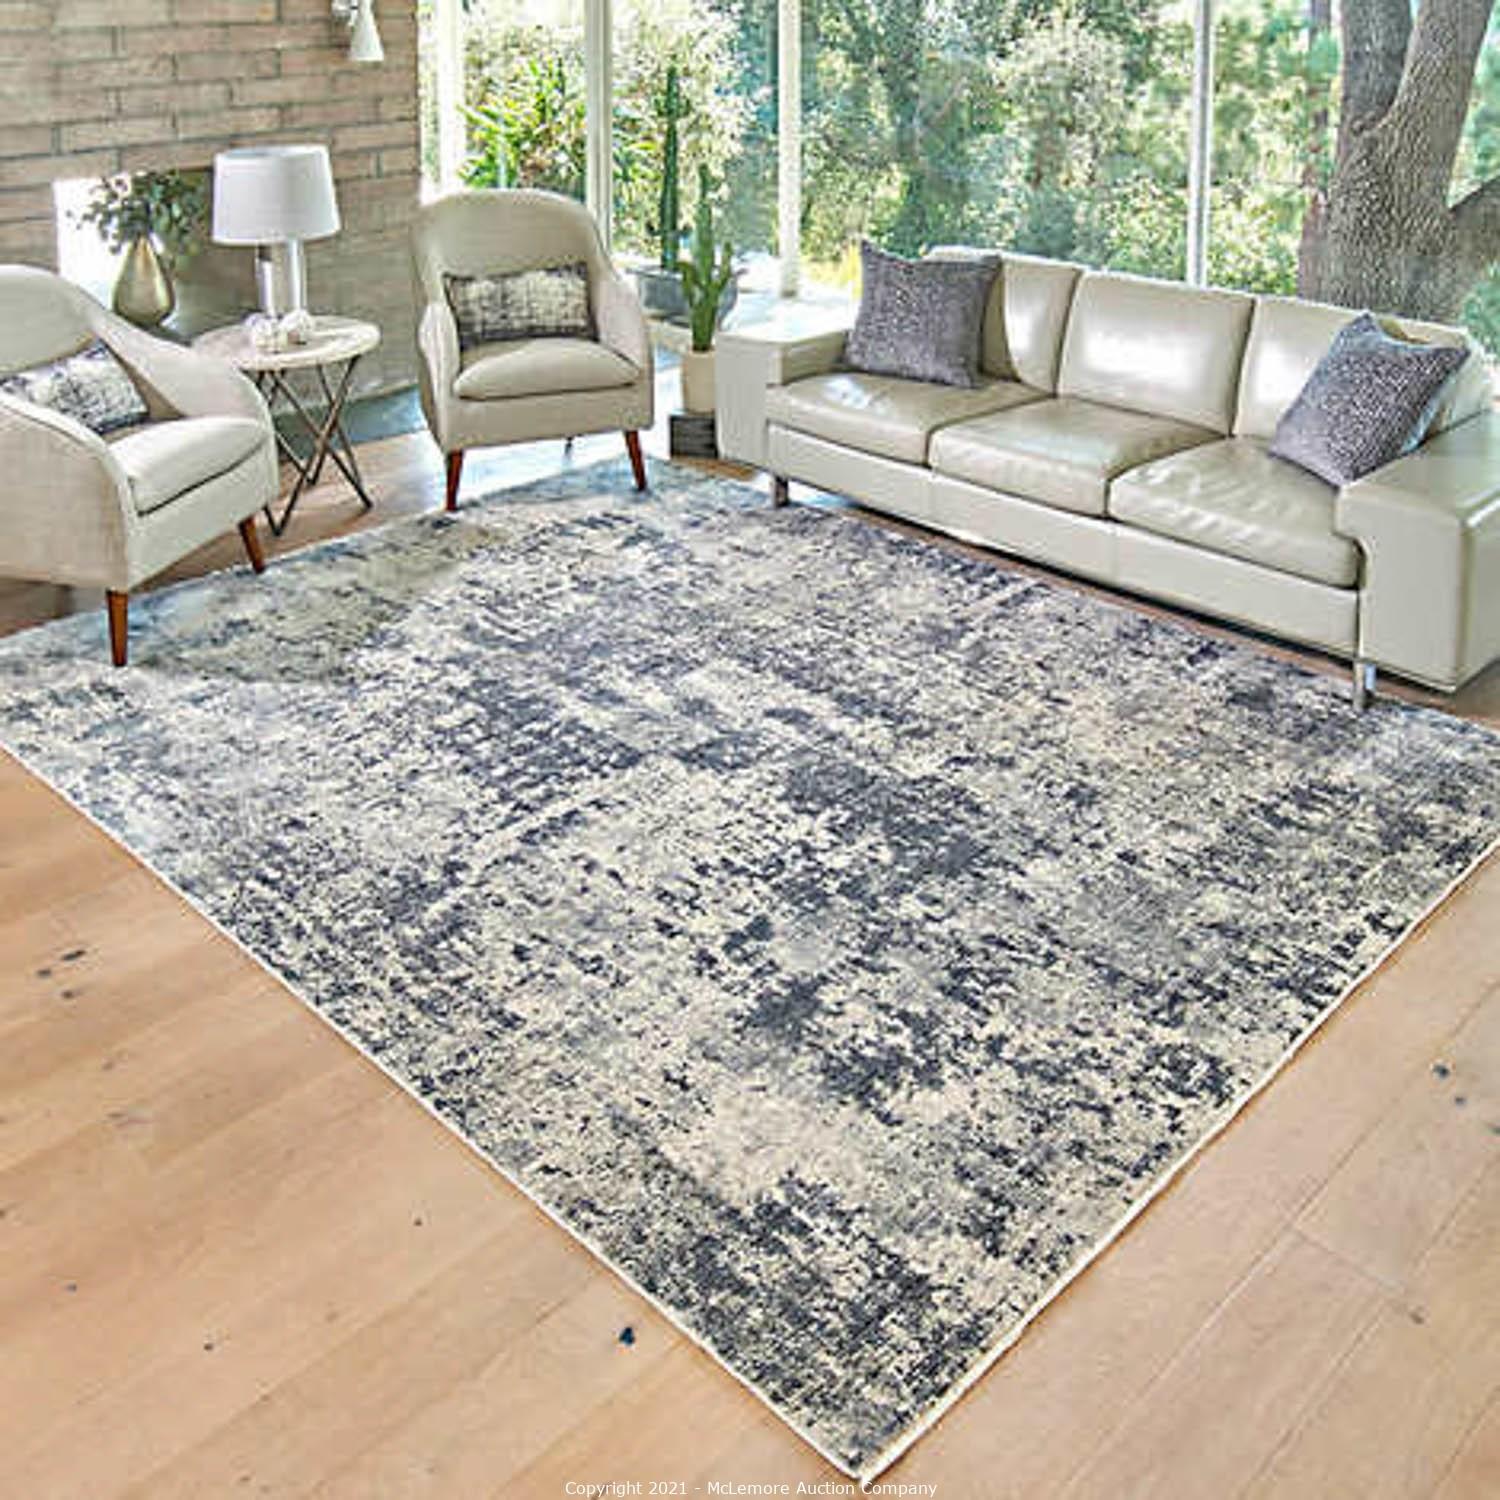 McLemore Auction Company - Auction: All New! Rugs, Runners, Accent Rugs,  and Bathroom and Kitchen and Bath Mats from the Largest Warehouse Club  Retailer - High End Solar and Cantilever Patio Umbrellas